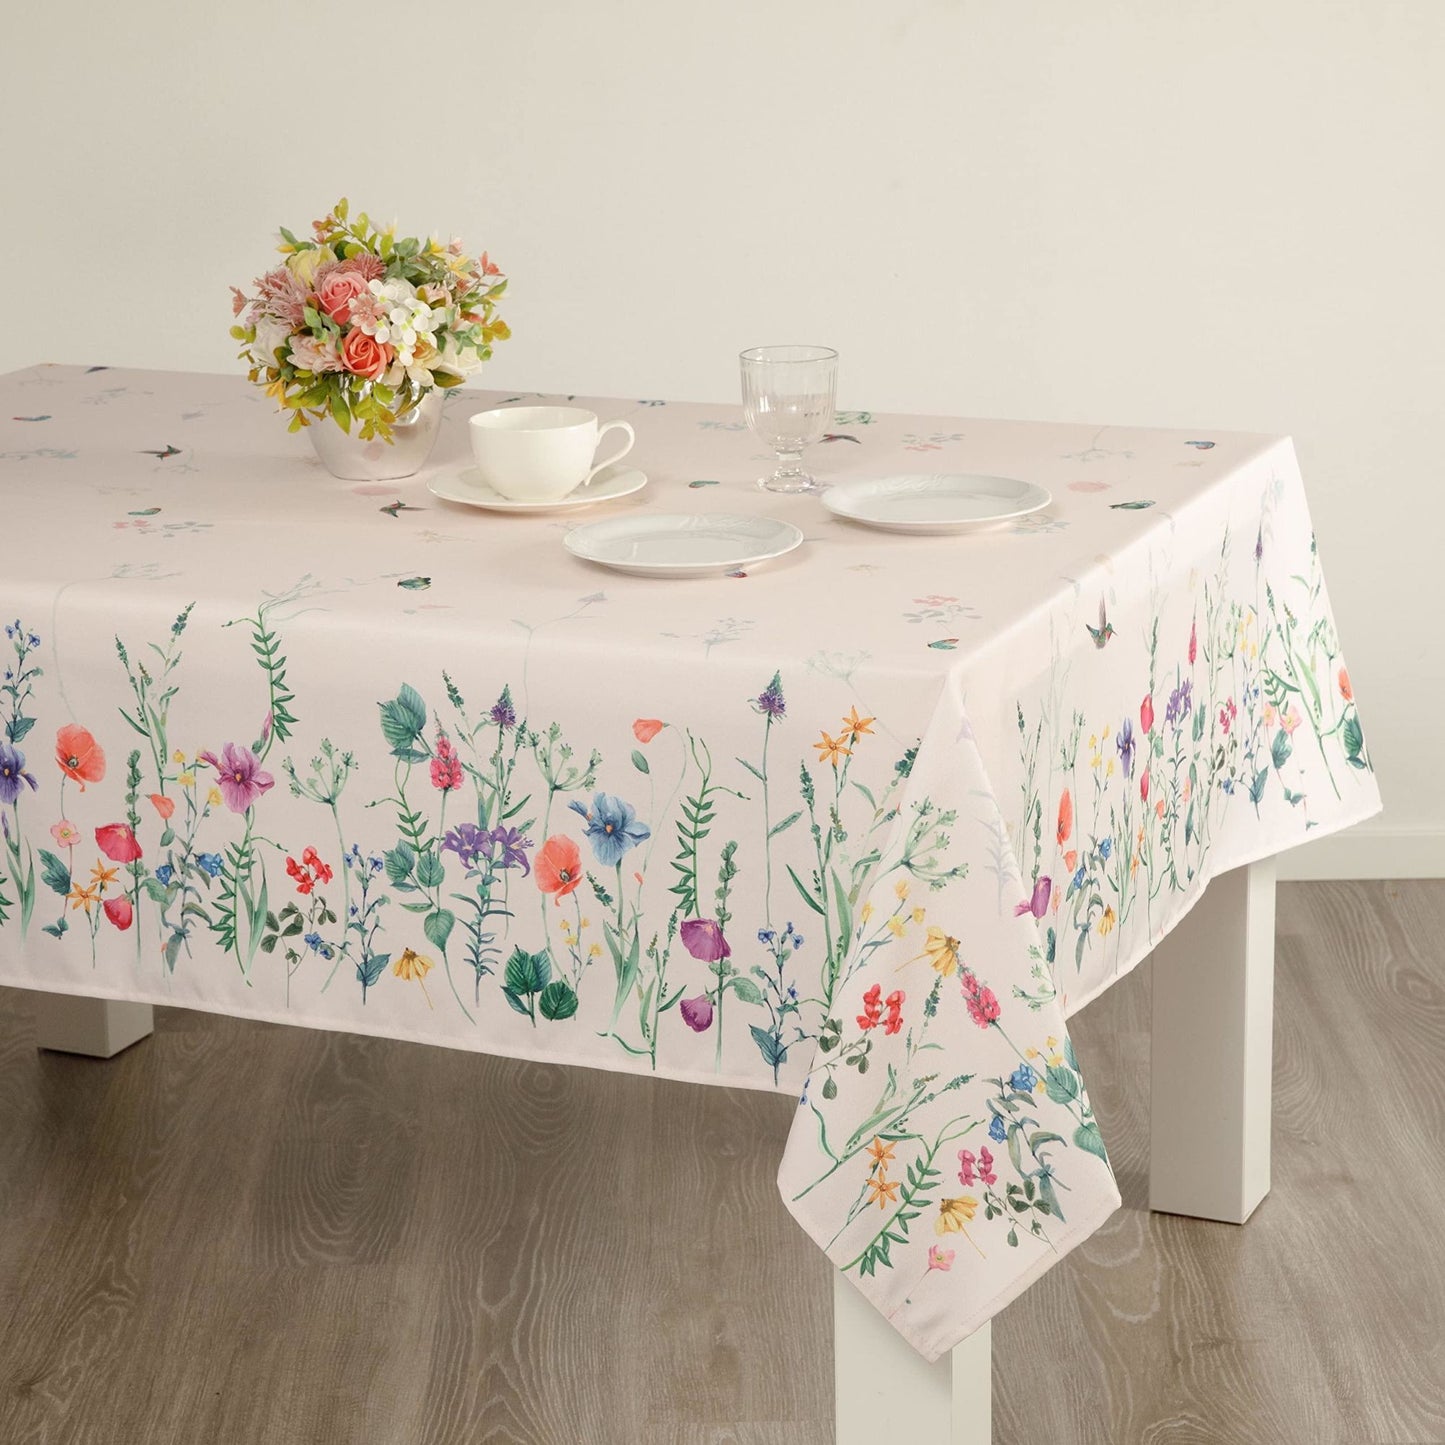 Watercolor Party Flowers Square Easter Tablecloth Non Iron Stain Resistant 52 x52 inch